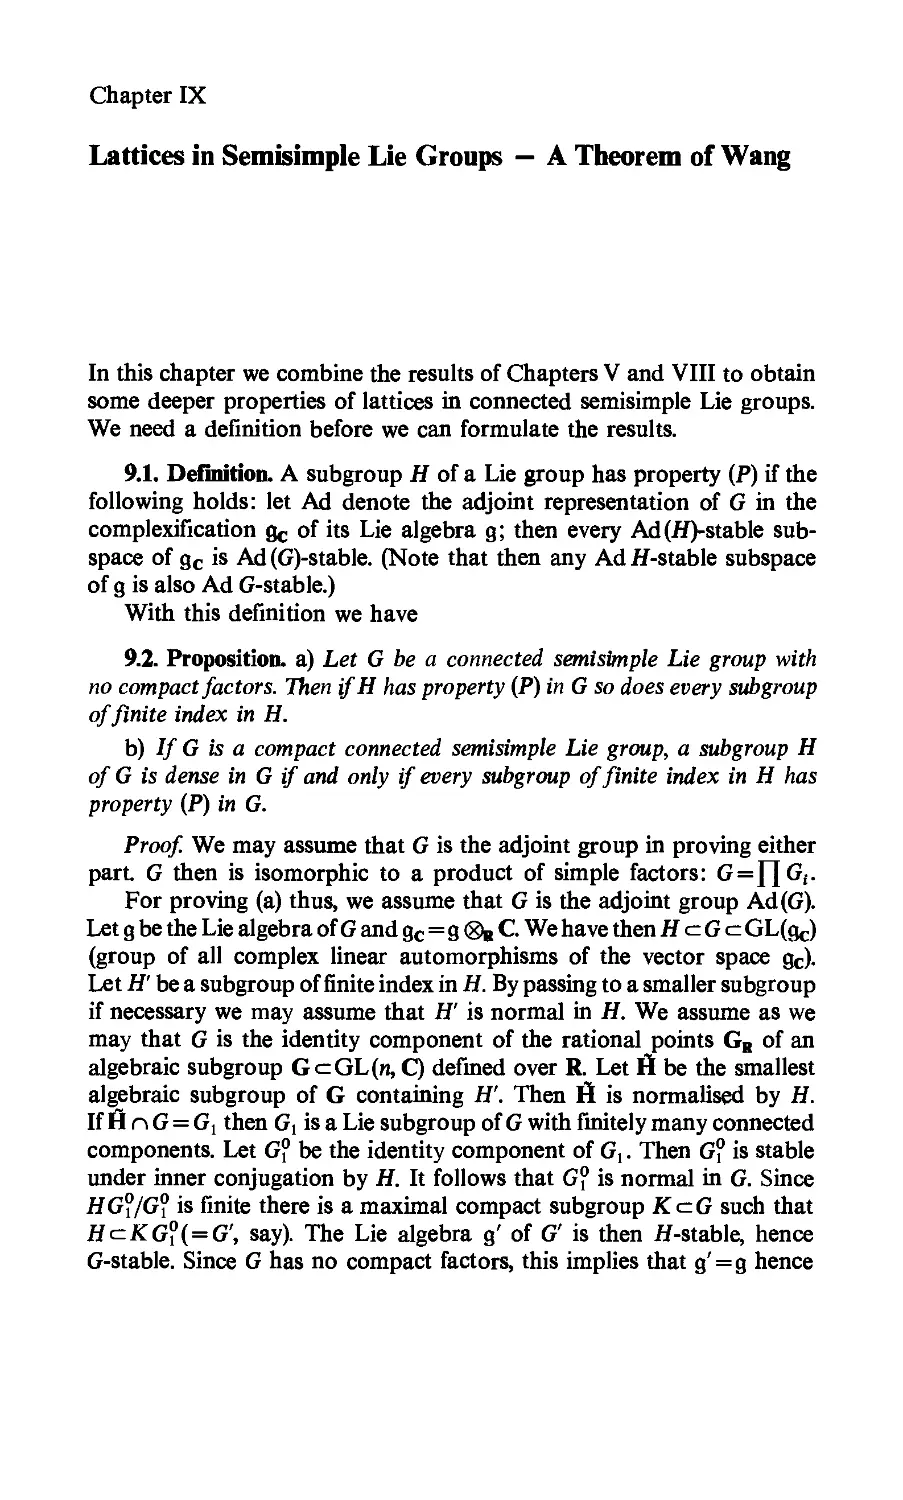 IX. Lattices in Semisimple Lie Groups - A Theorem of Wang